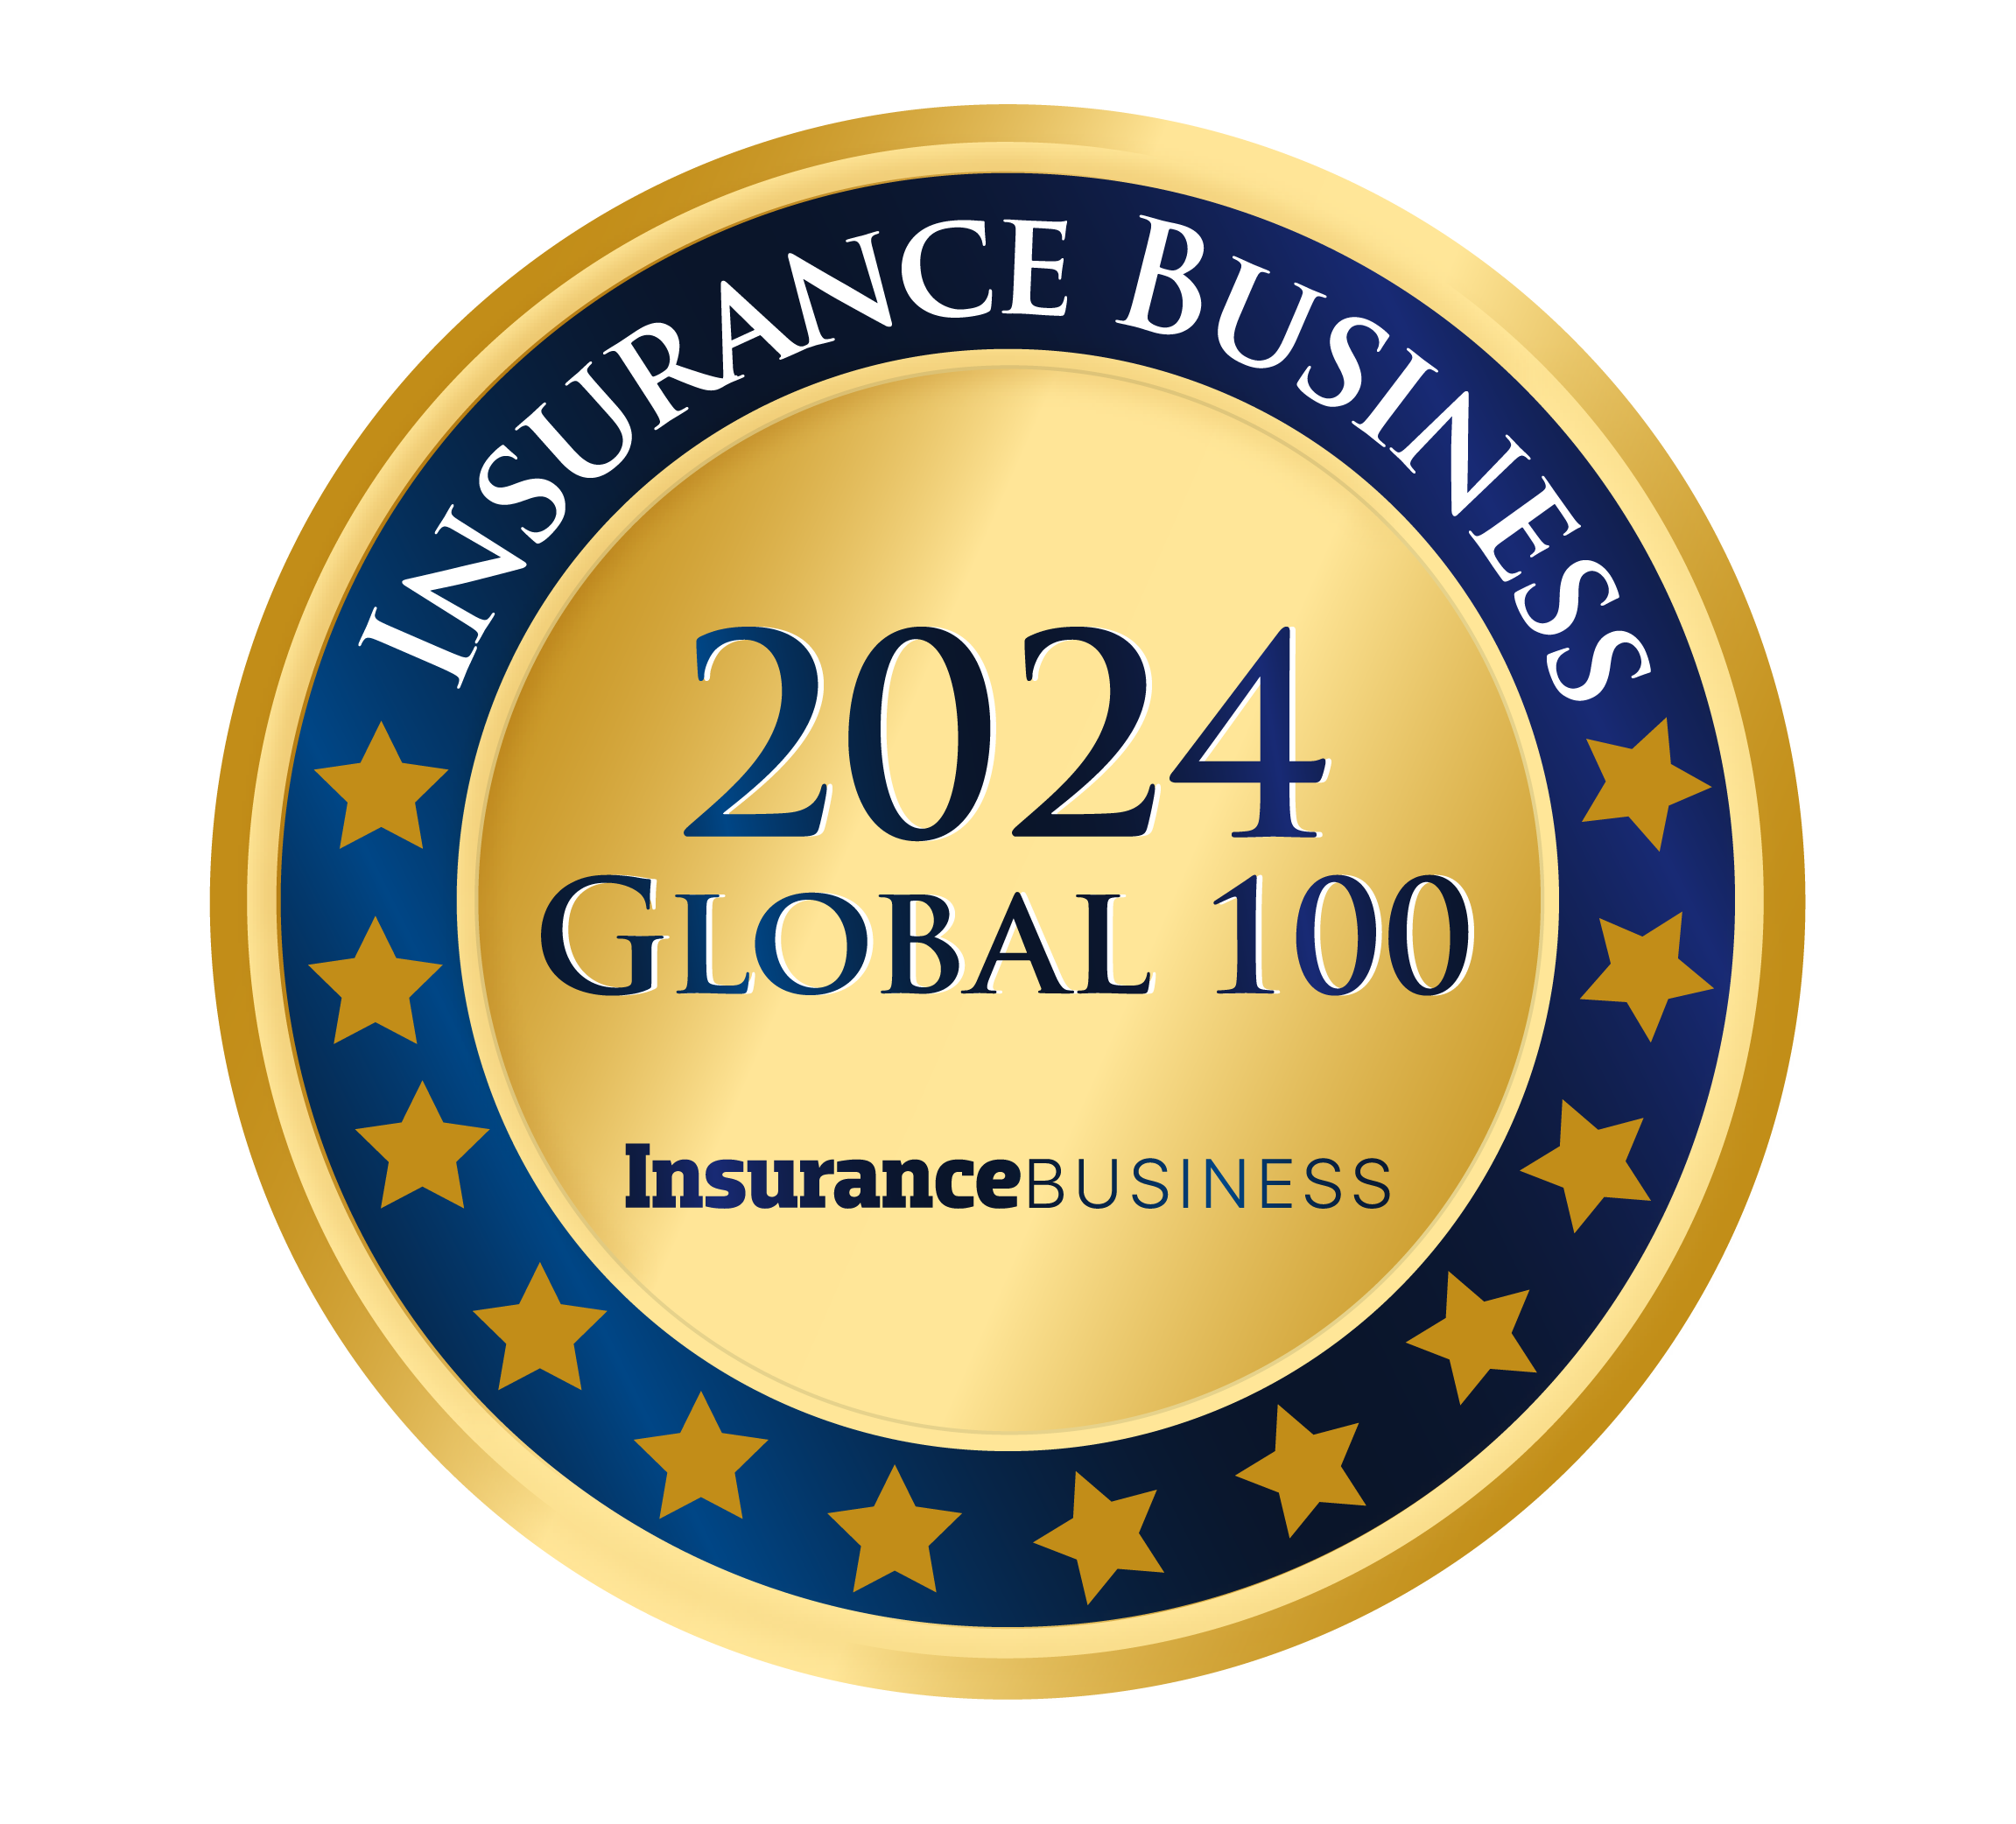 The Best Insurance Professionals and Brokers Worldwide | Global 100